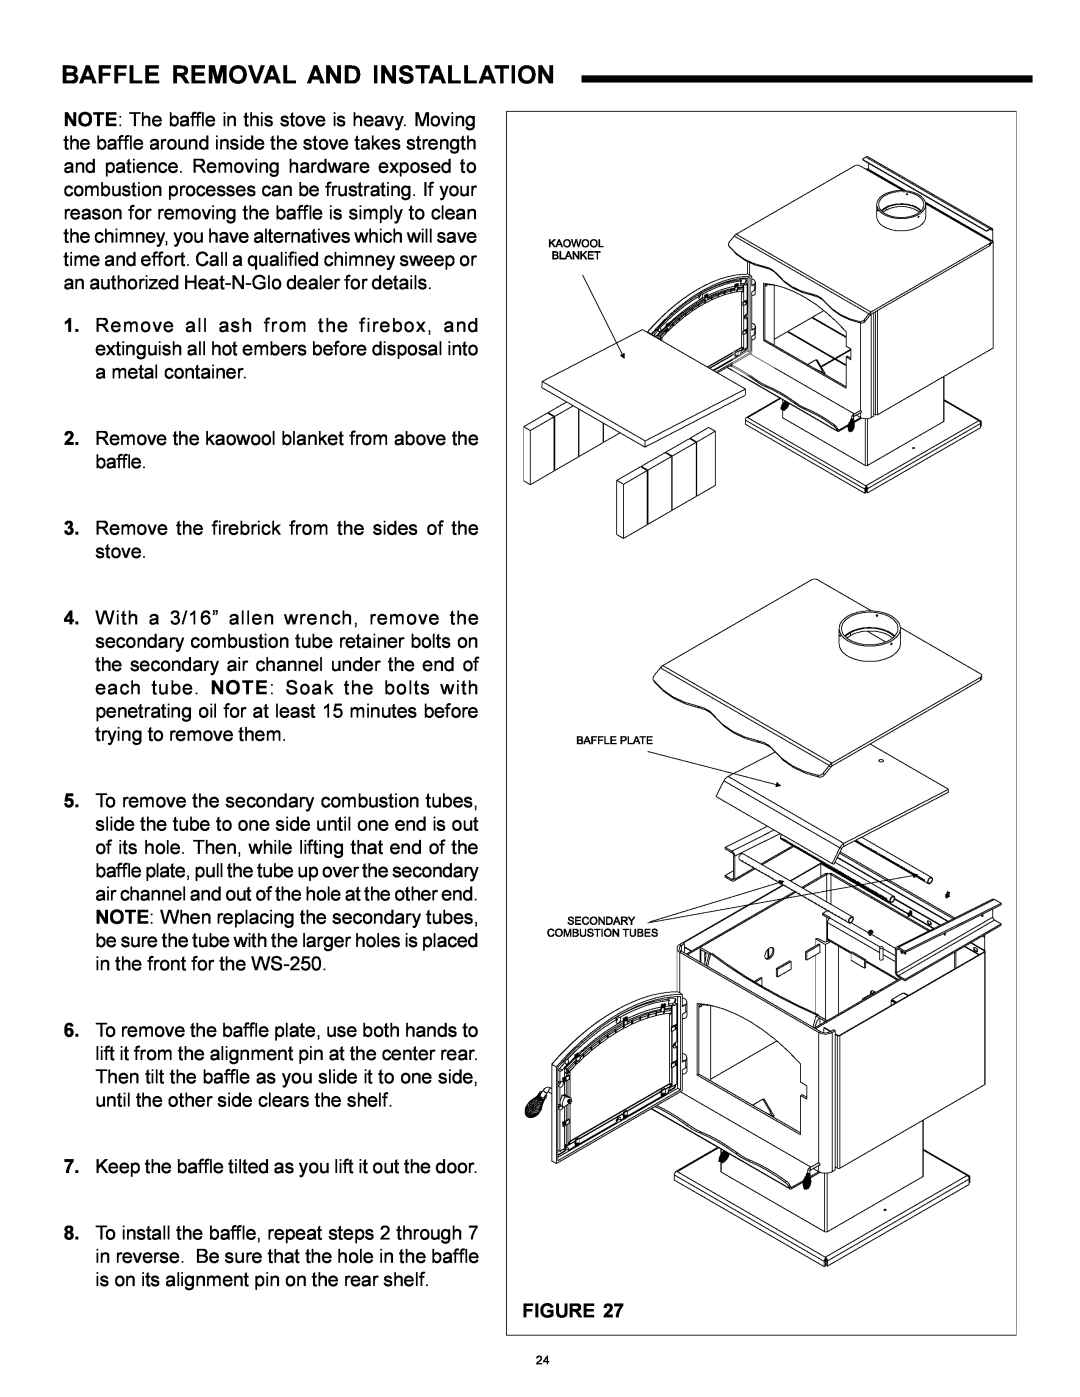 Heat & Glo LifeStyle WS-150, WS-250 installation instructions Baffle Removal And Installation 